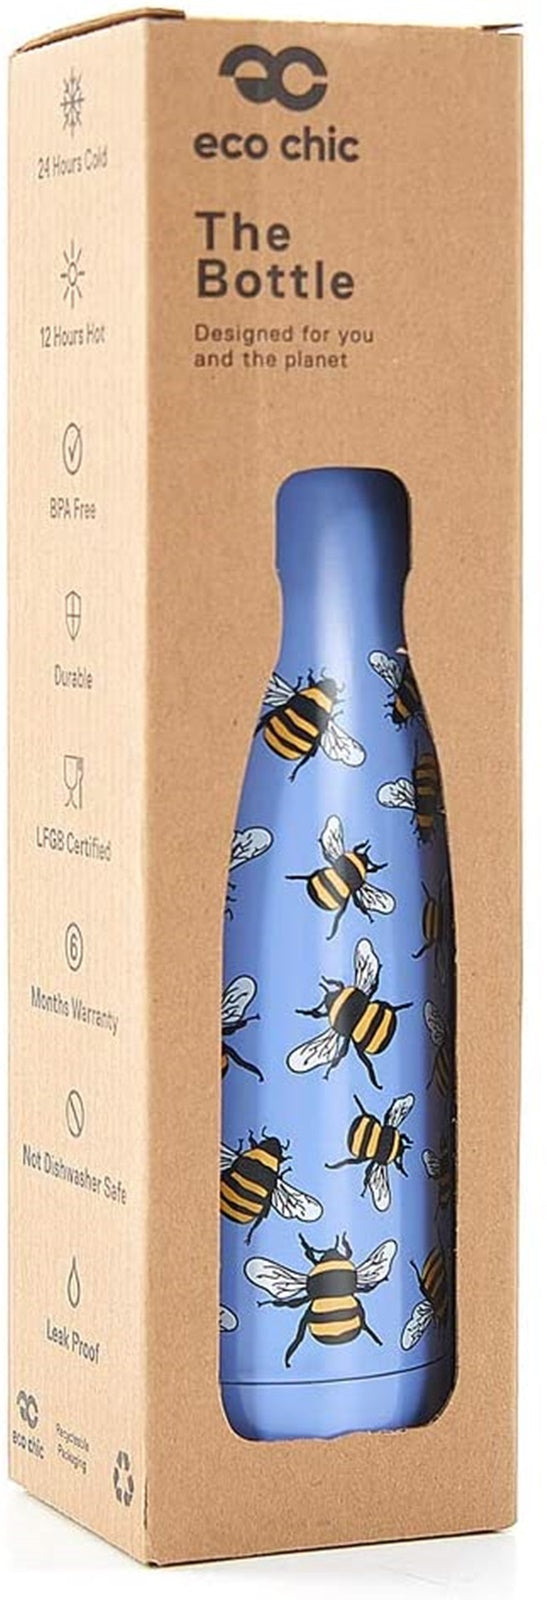 Eco Chic Reusable Thermal Bottle | Stainless Steel Insulated Travel Bottle with Leakproof Lid | Eco-Friendly and Reusable for Hot & Cold Drinks (Blue Bees, 500ml/17oz)